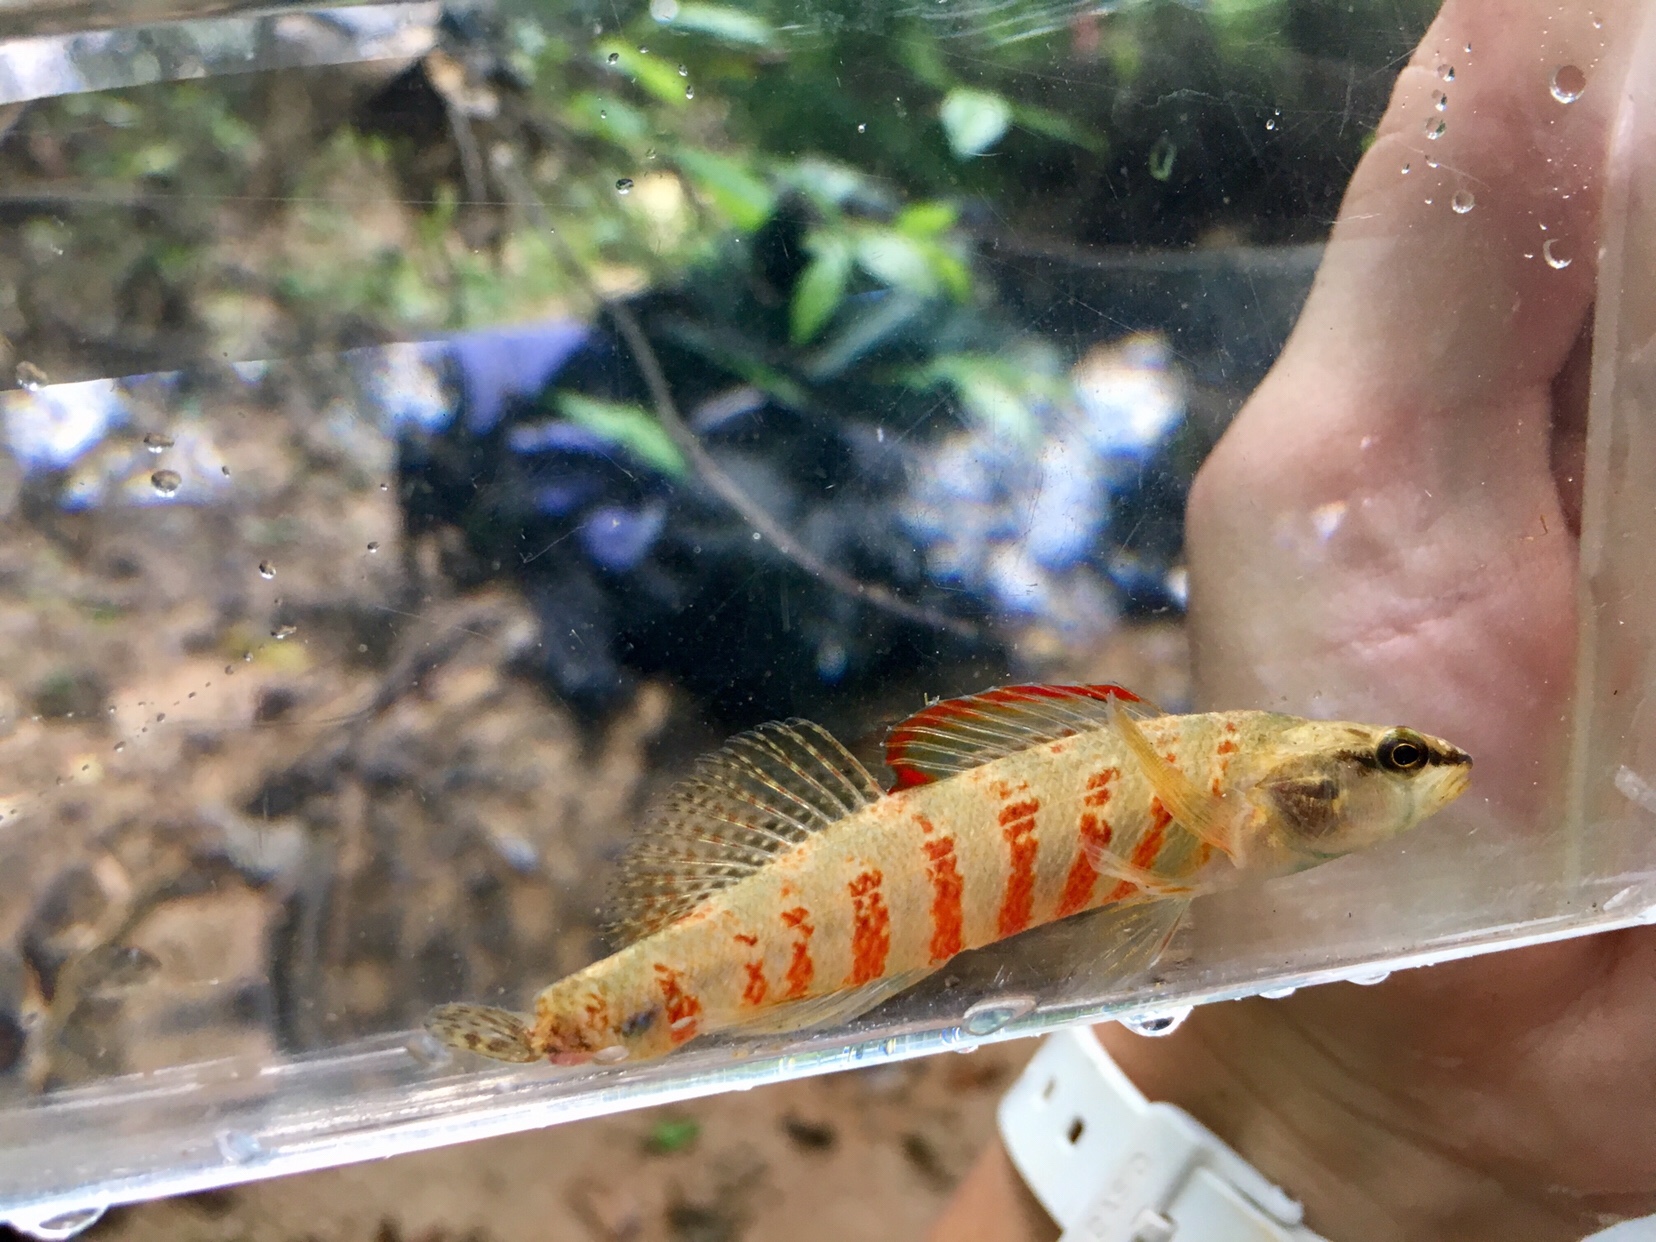 This Christmas Darter lost his caudal fin at some point, but was still surviving perfectly fine without it. 